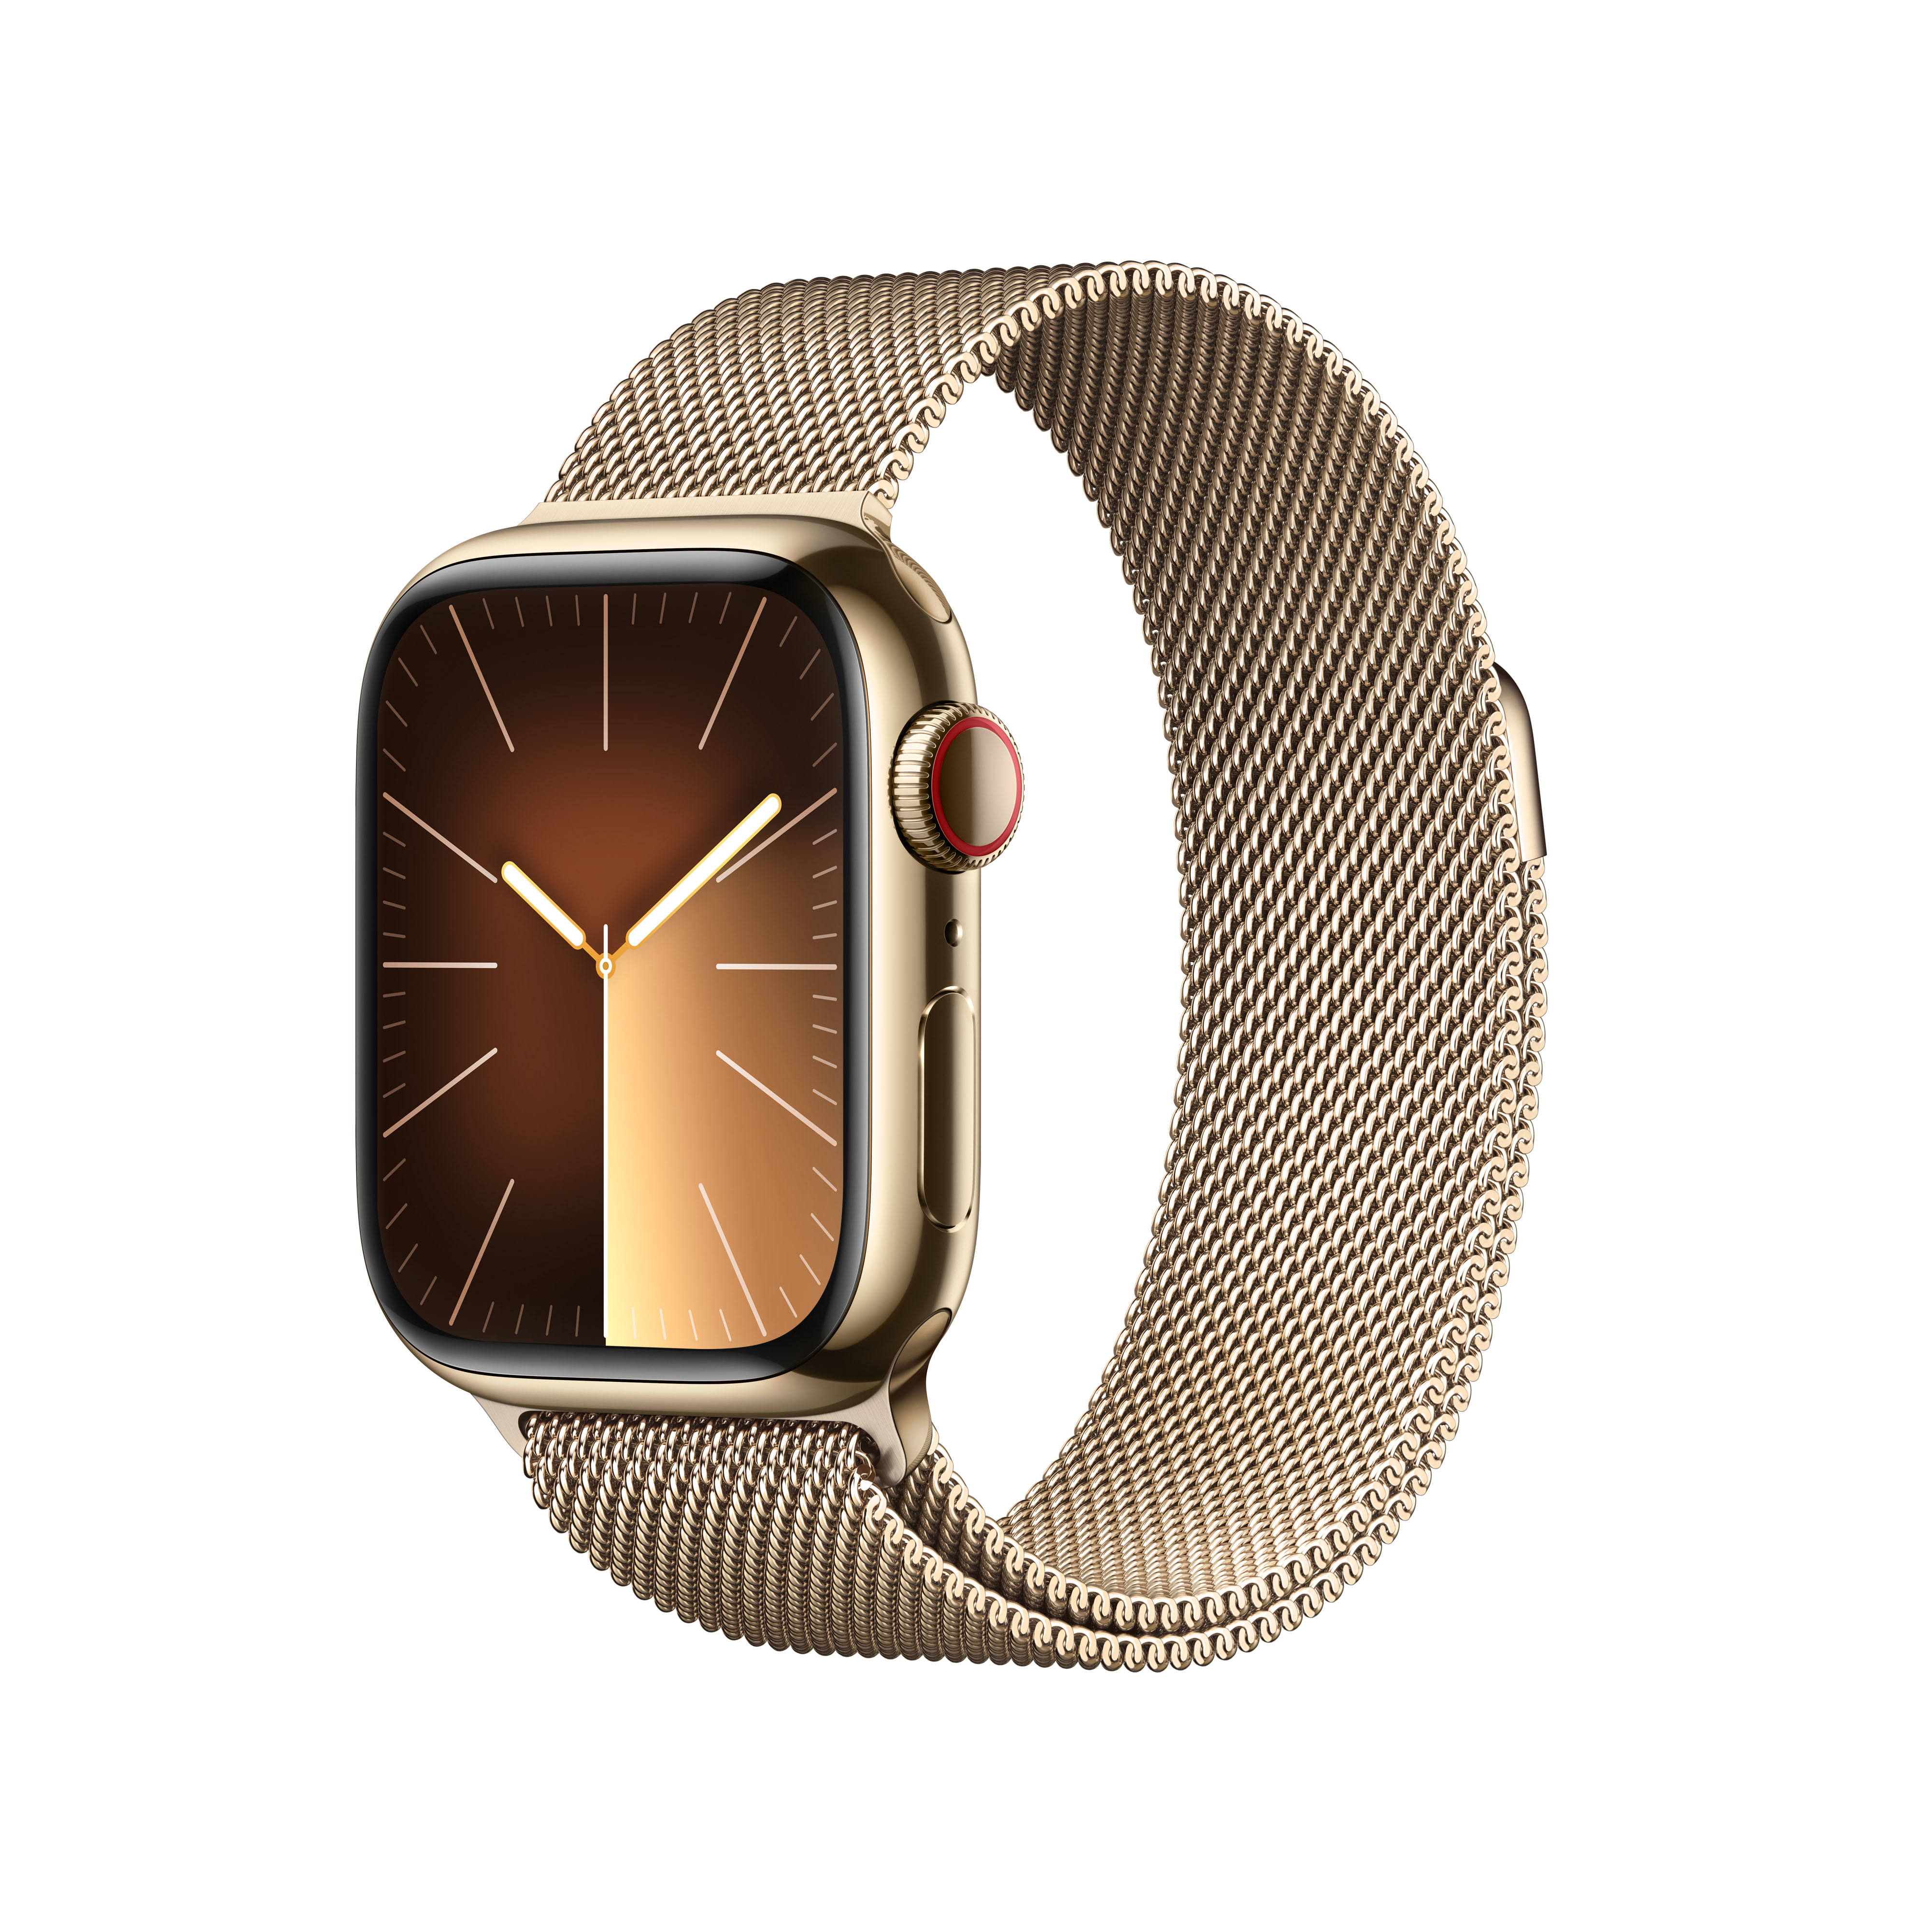 Apple - Reloj Smartwatch Apple Watch Series 9 GPS + Cellular 41mm Gold Stainless Steel Case con Gold Milanese Loop